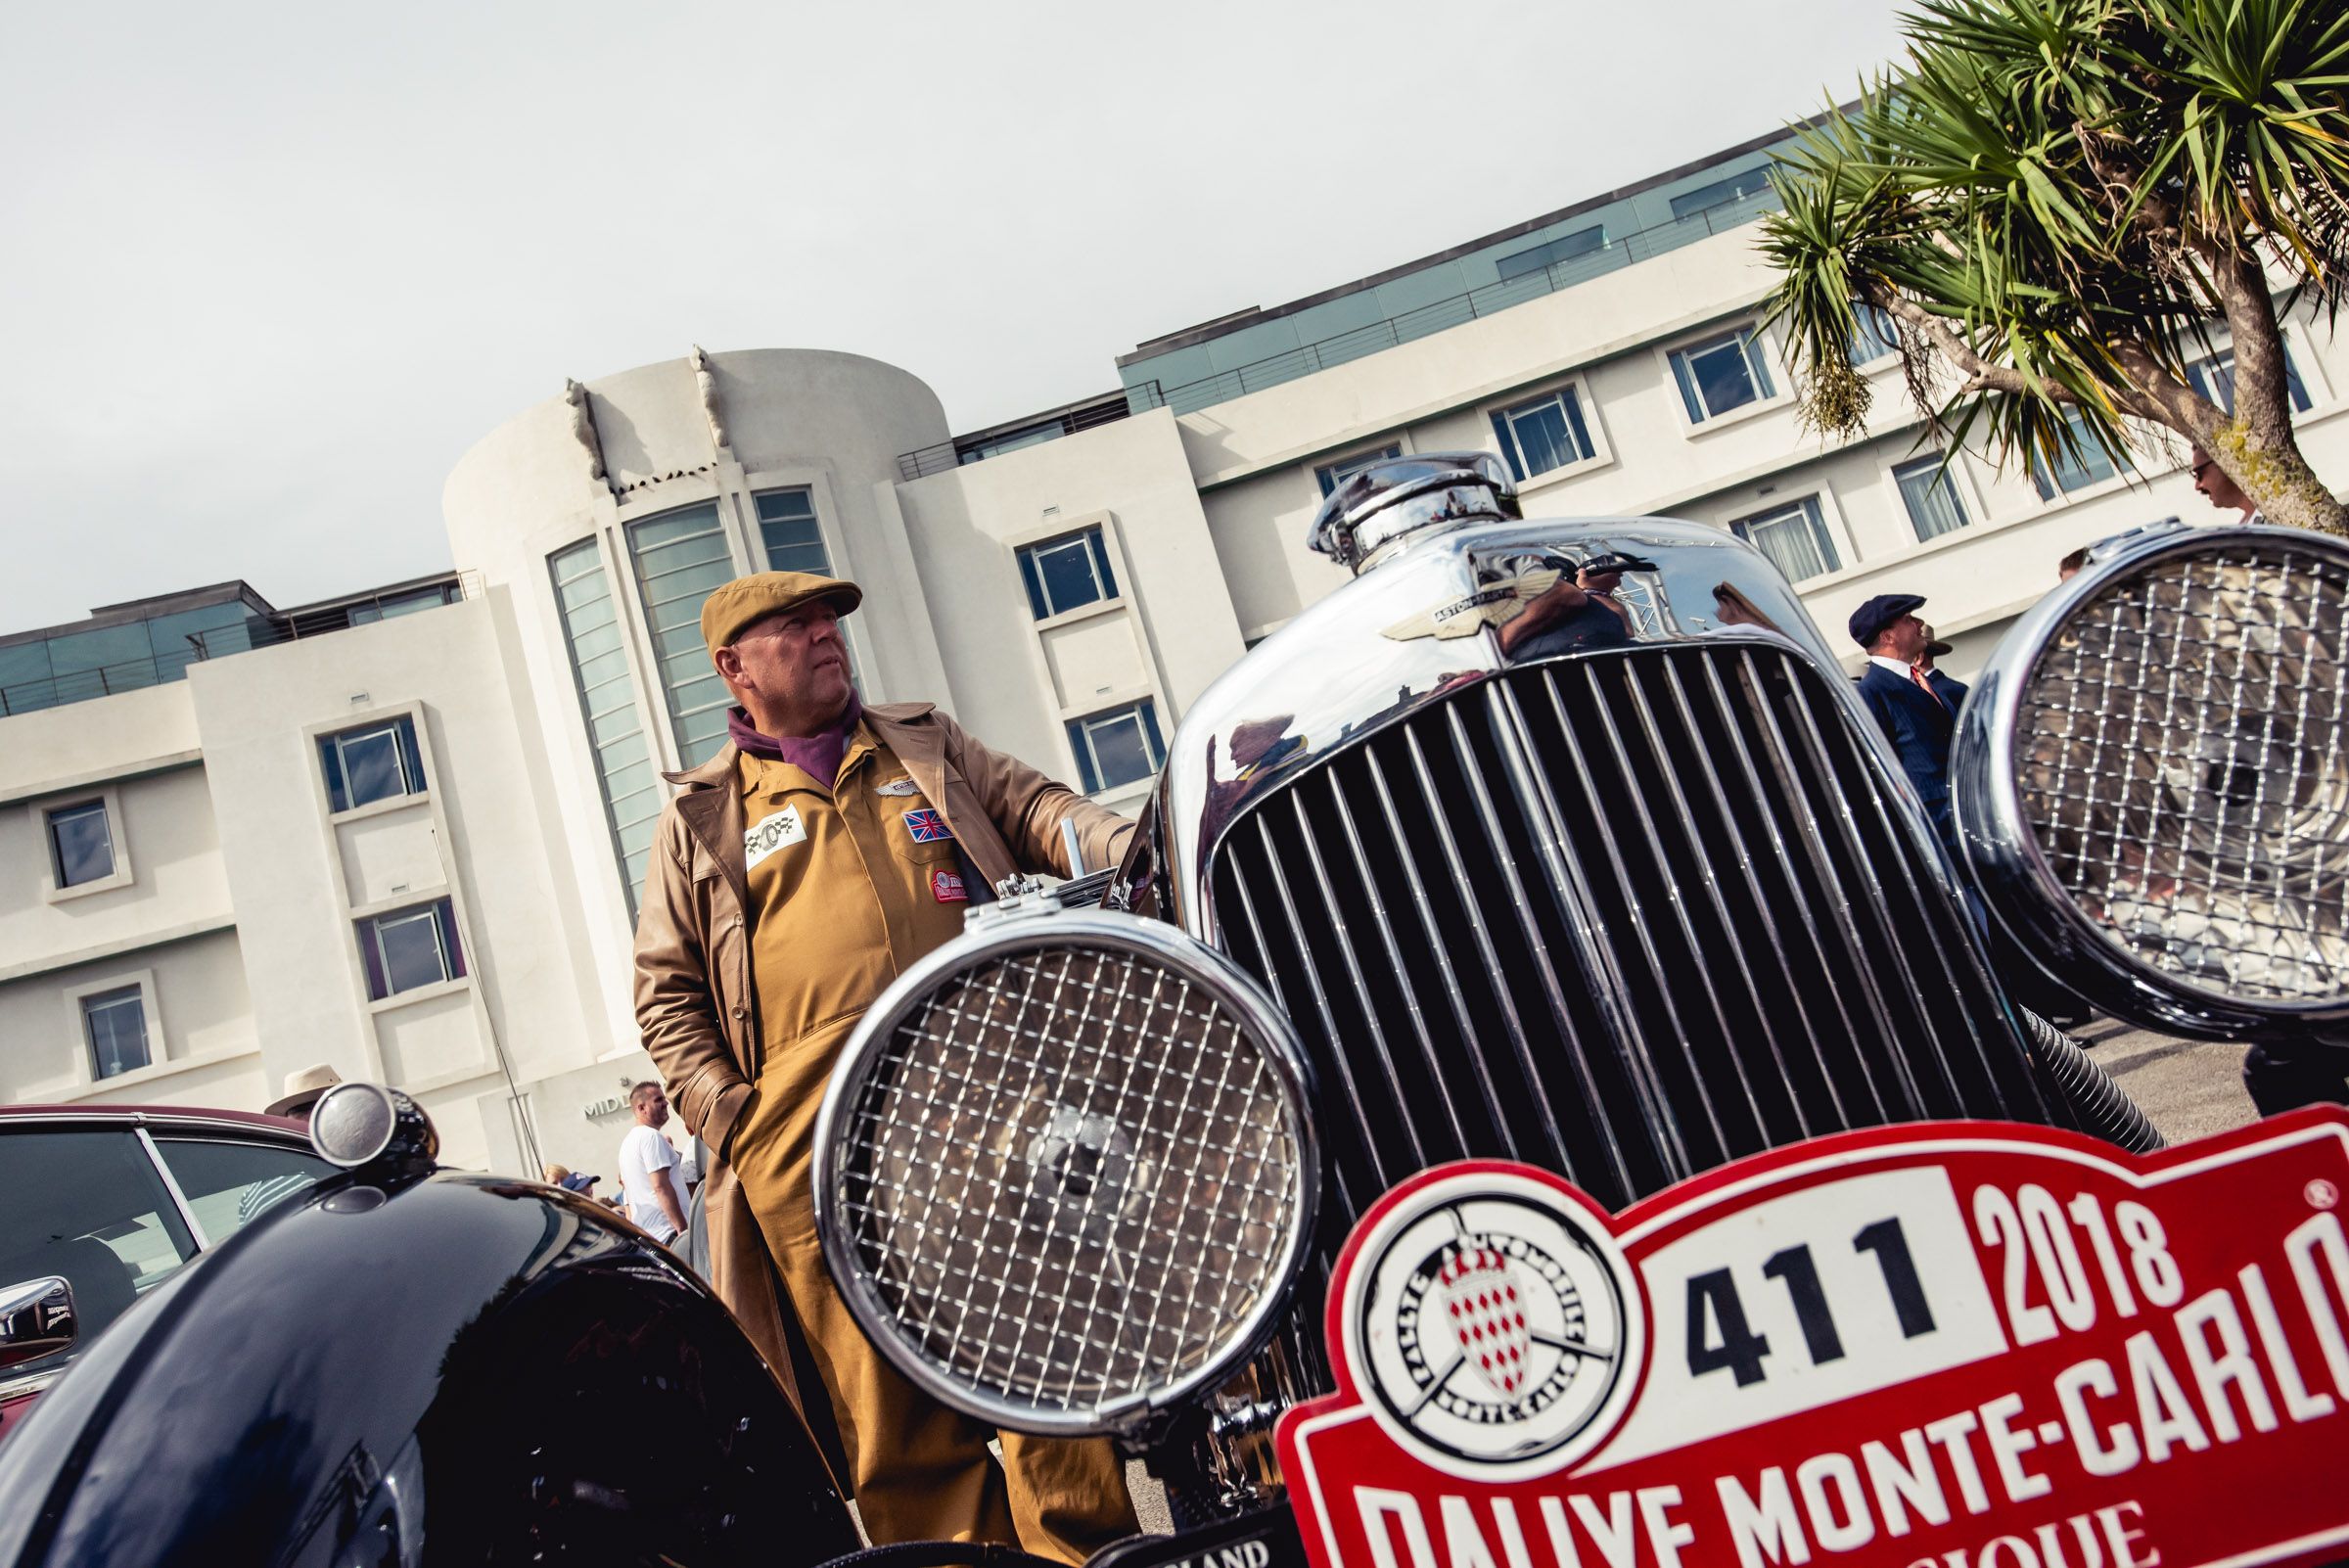 Vintage by the Sea 2018